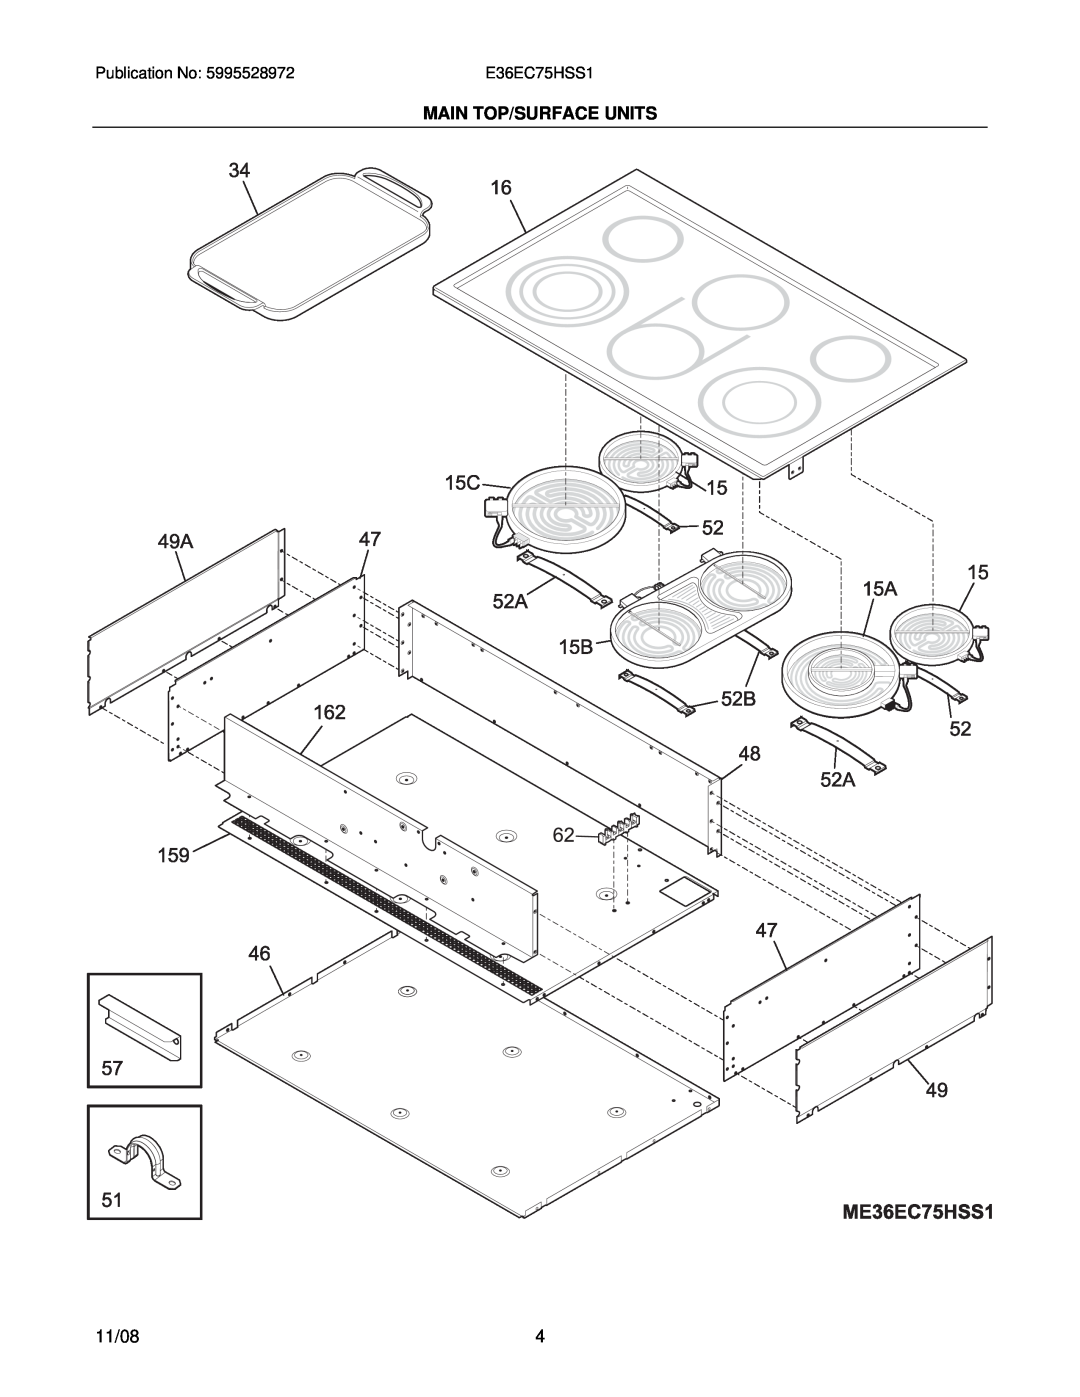 Electrolux E36EC75HSS1, 38066423880S1 installation instructions Main Top/Surface Units, 11/08 